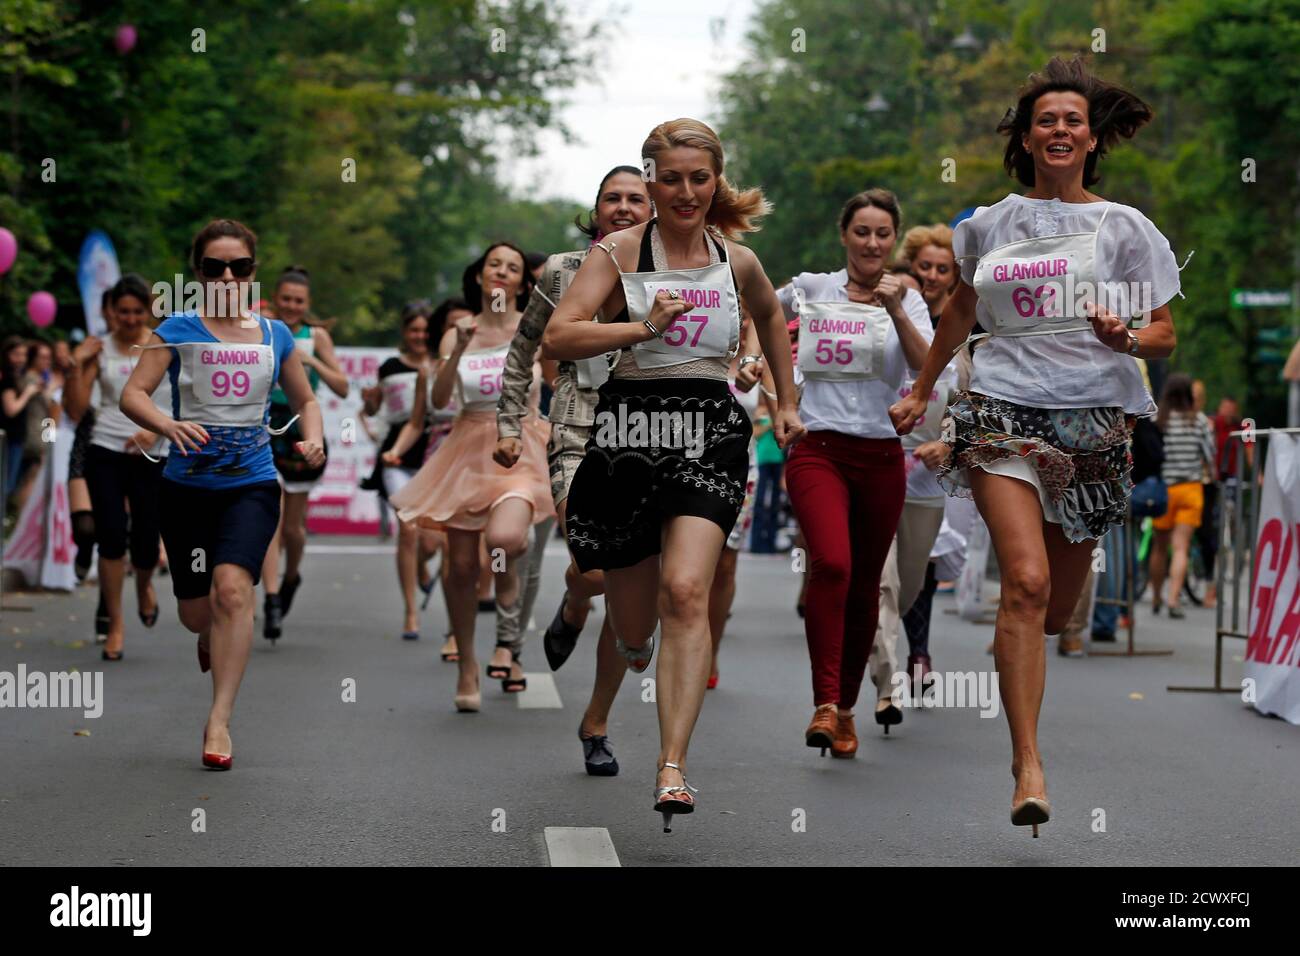 Participants run in high-heels during the warm-up of the Stiletto Run in  Bucharest June 14, 2014. The annual 50 metres race requires participants to  wear high-heels that are at least 7cm tall.